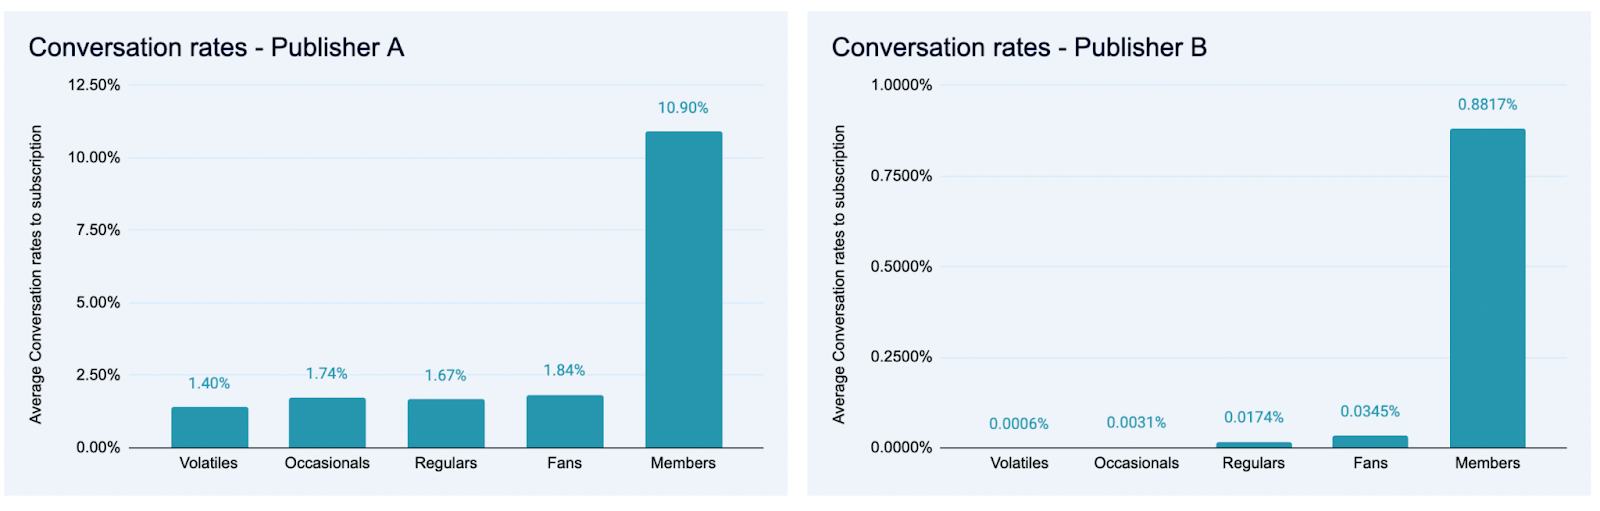 Engagement data & conversion strategies to increase revenue